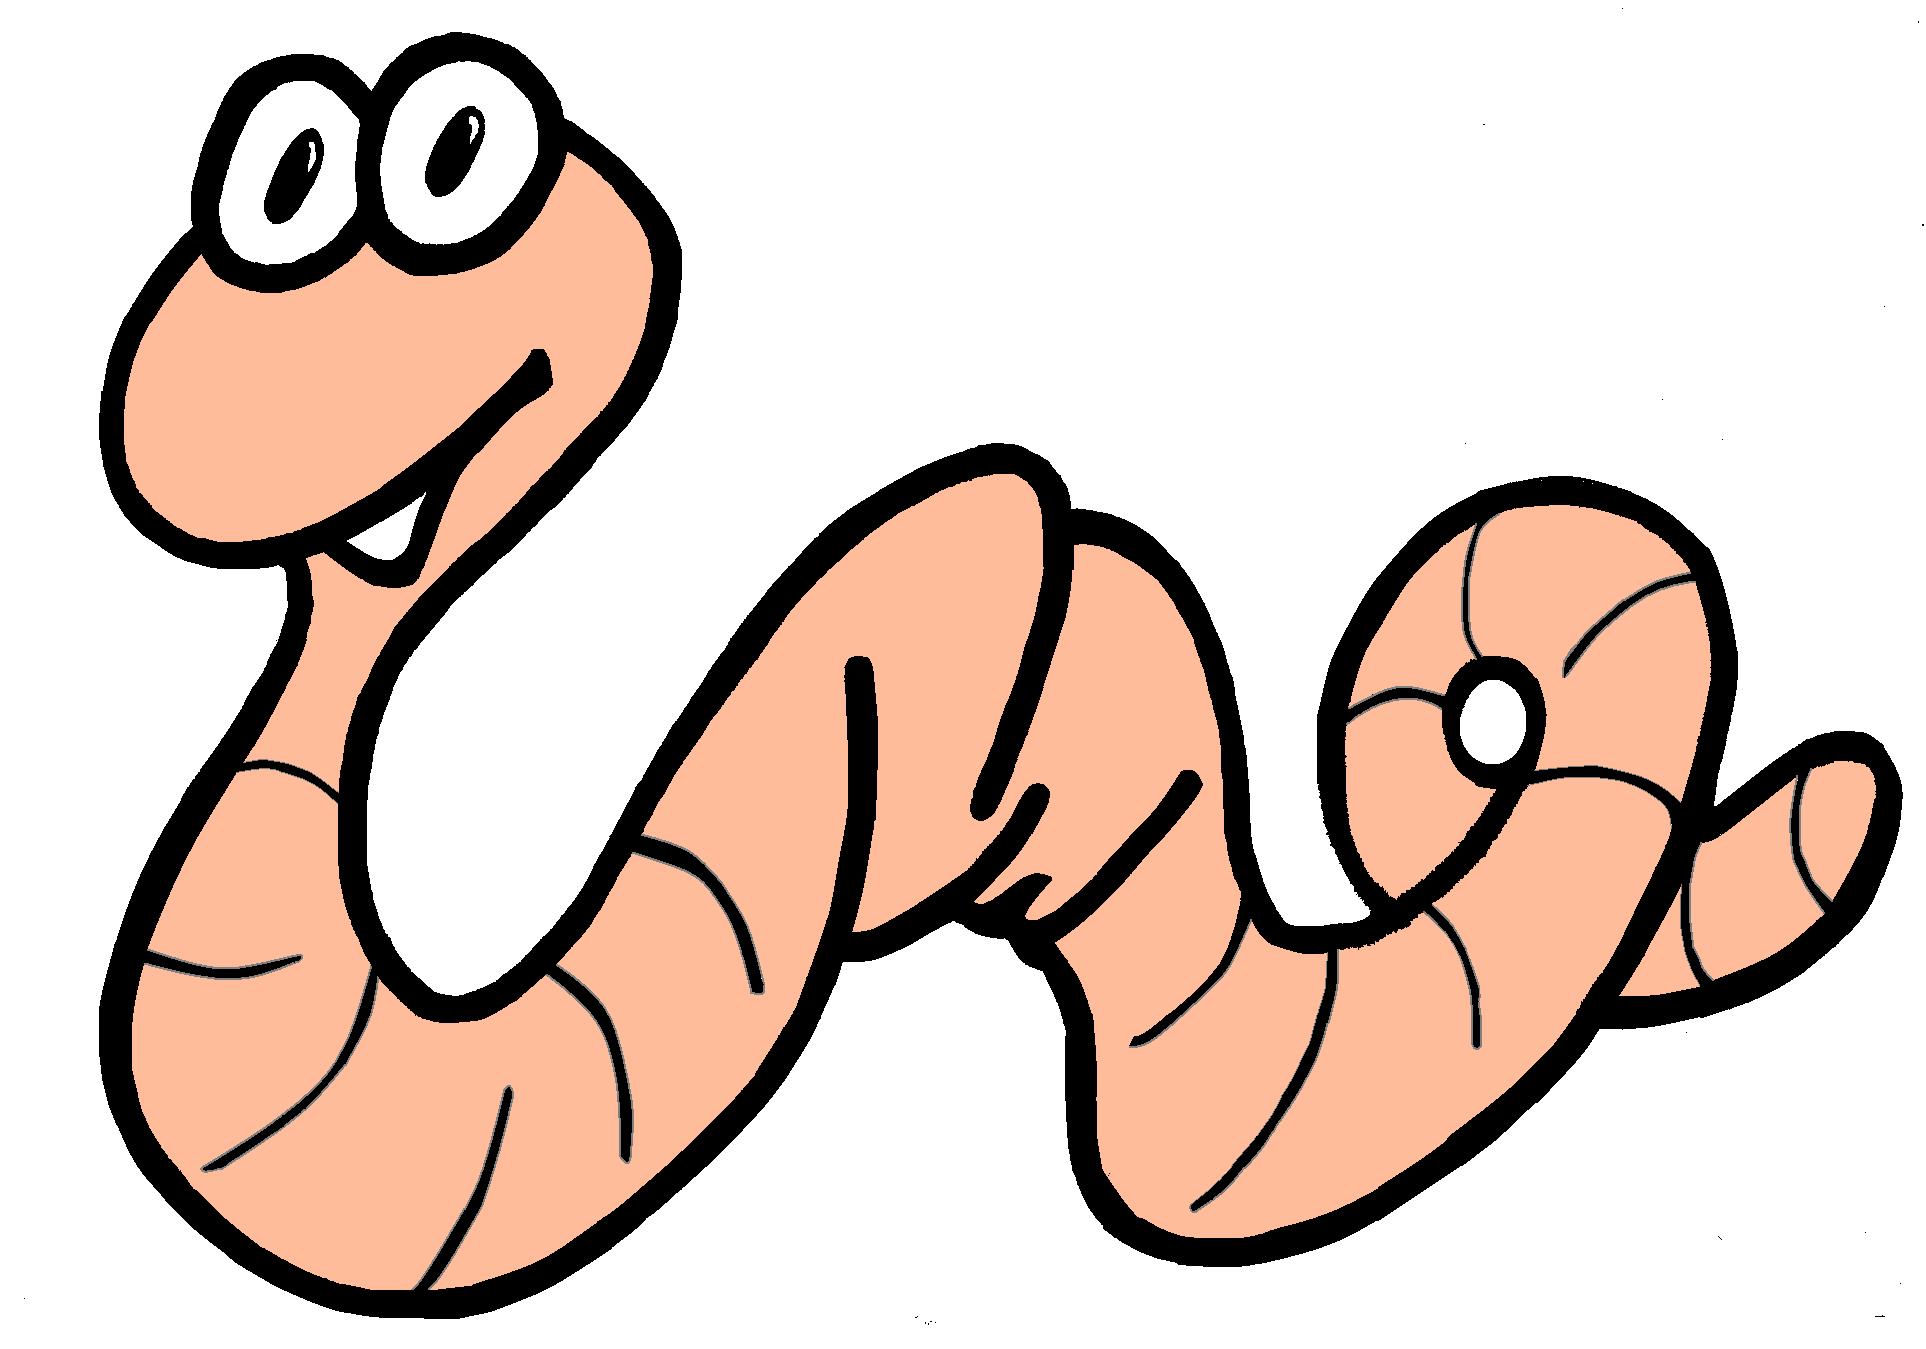 15 Worm Funny Free Cliparts That You Can Download To You Computer And